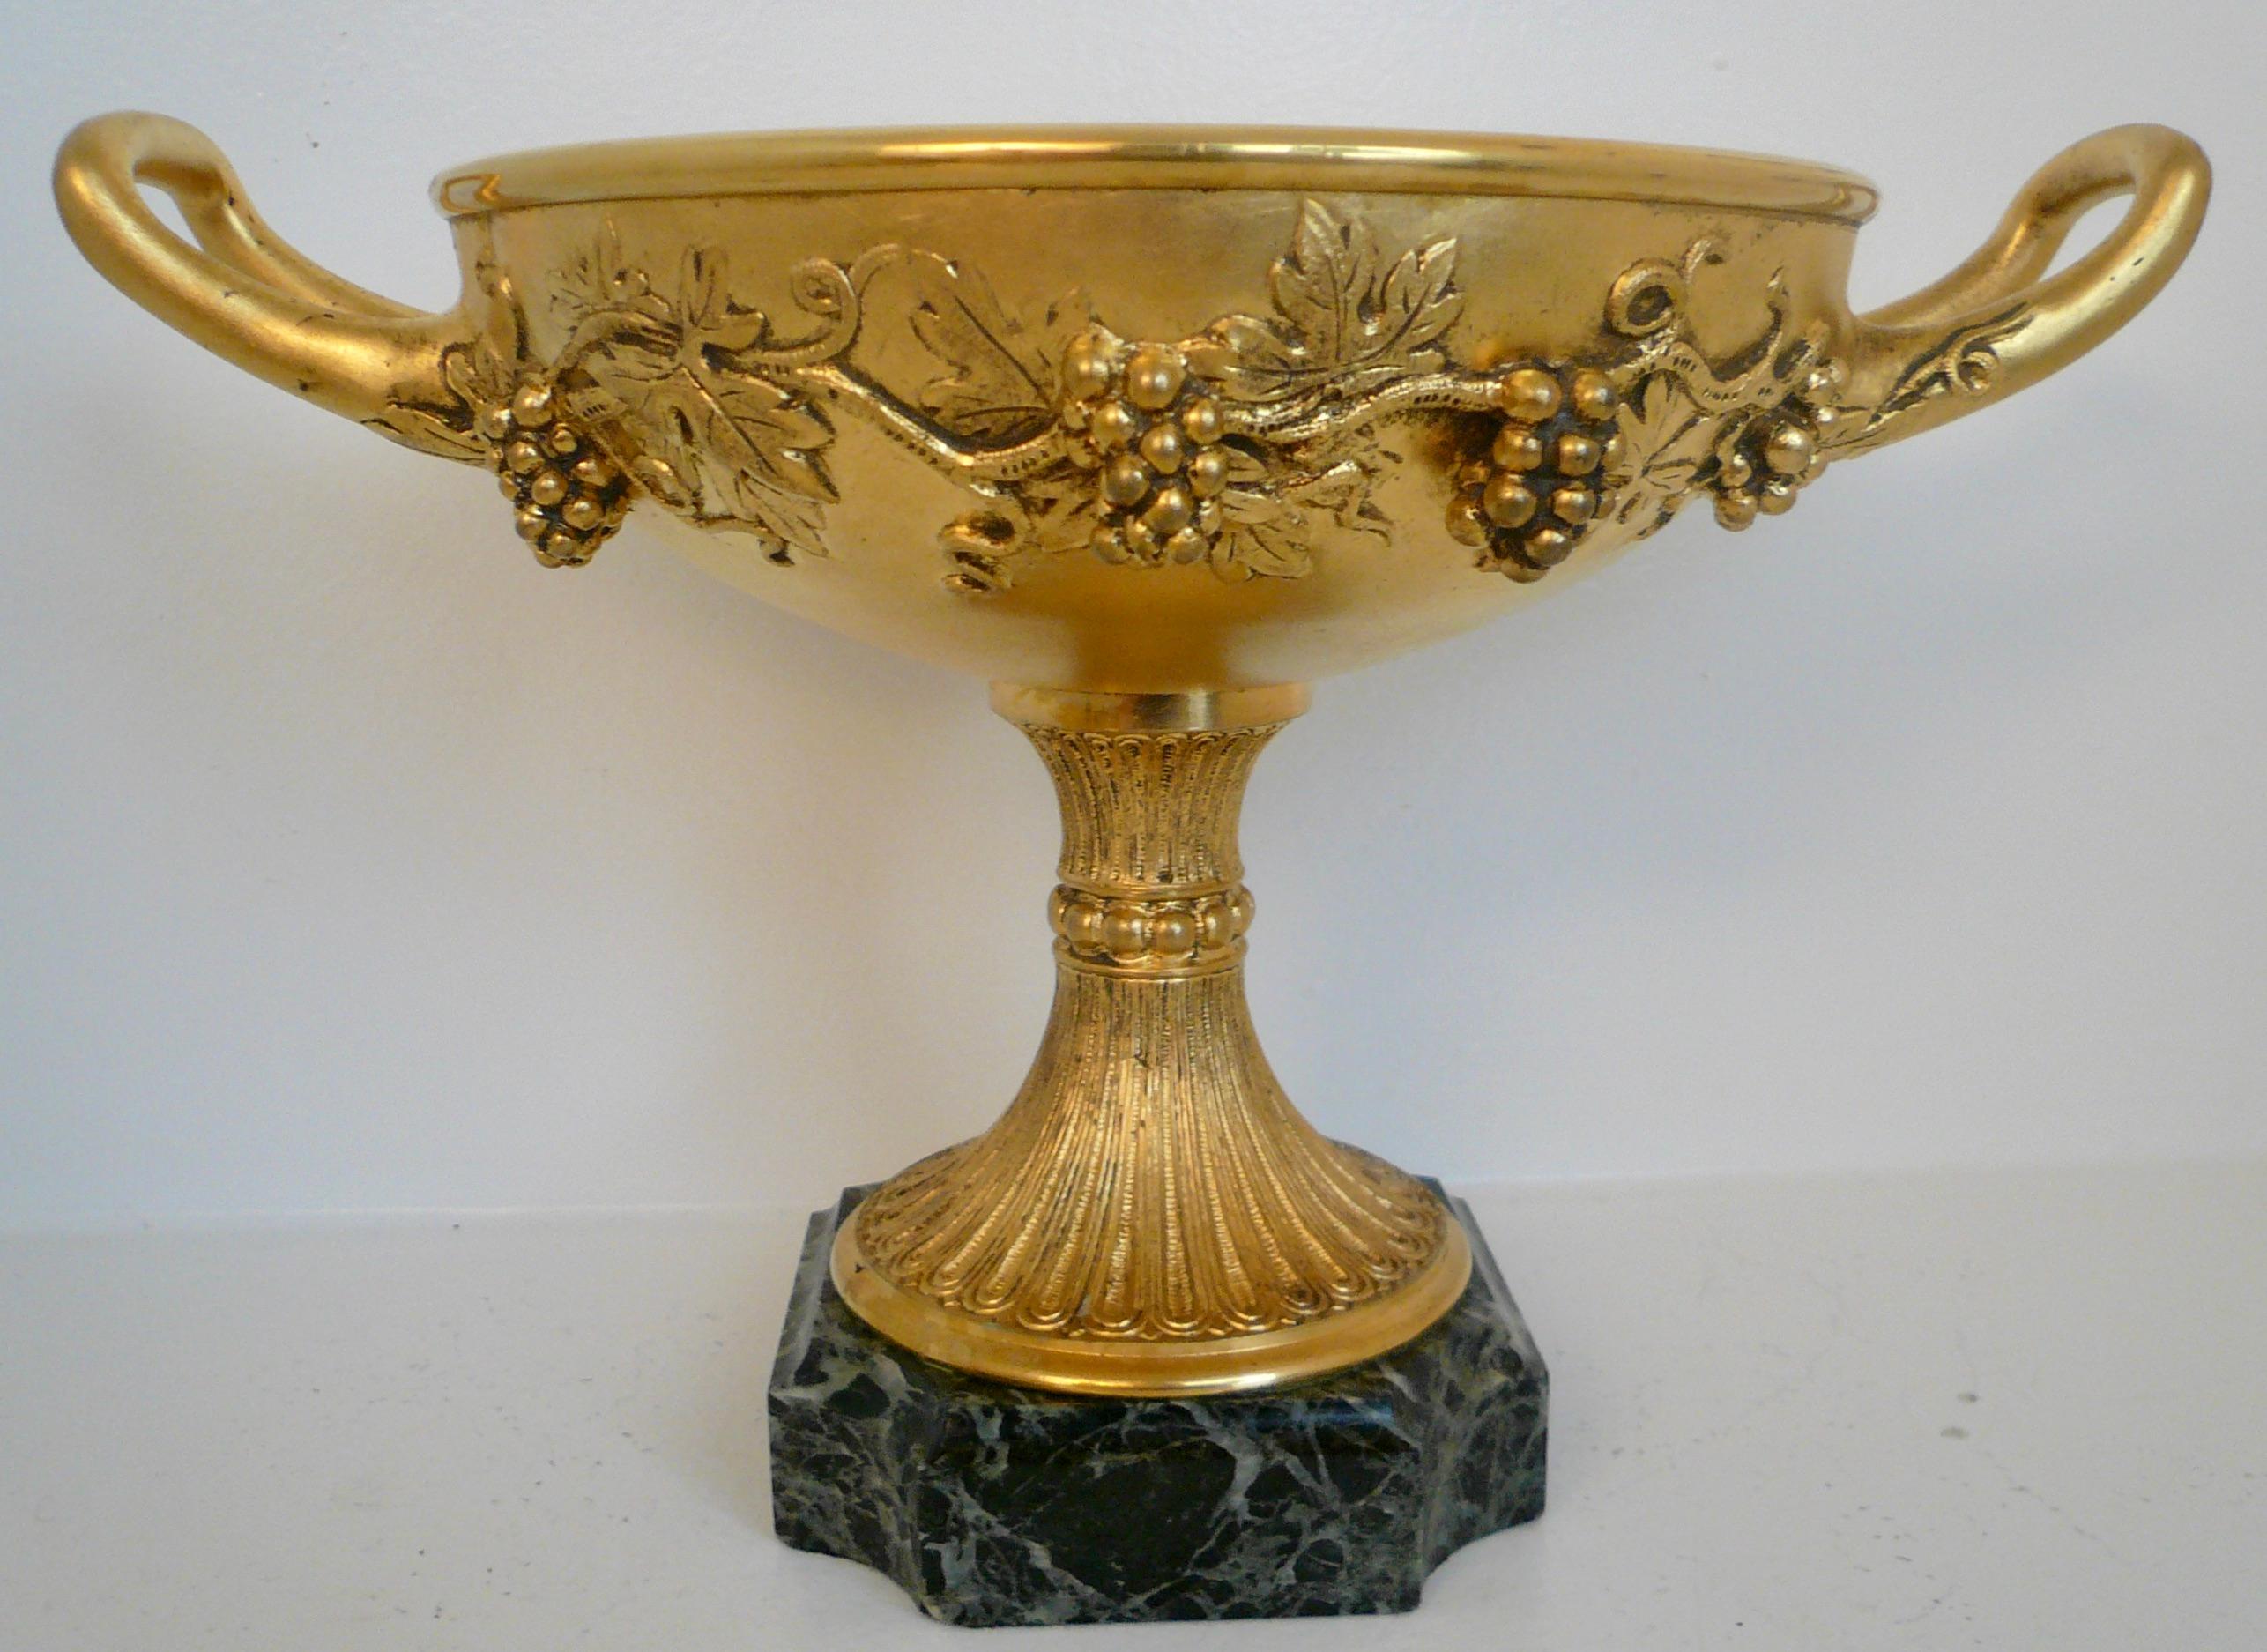 This finely detailed gilt bronze compote features a border of vintage motif including grapes and grape leaves. The compote is mounted on a verde antique marble base.